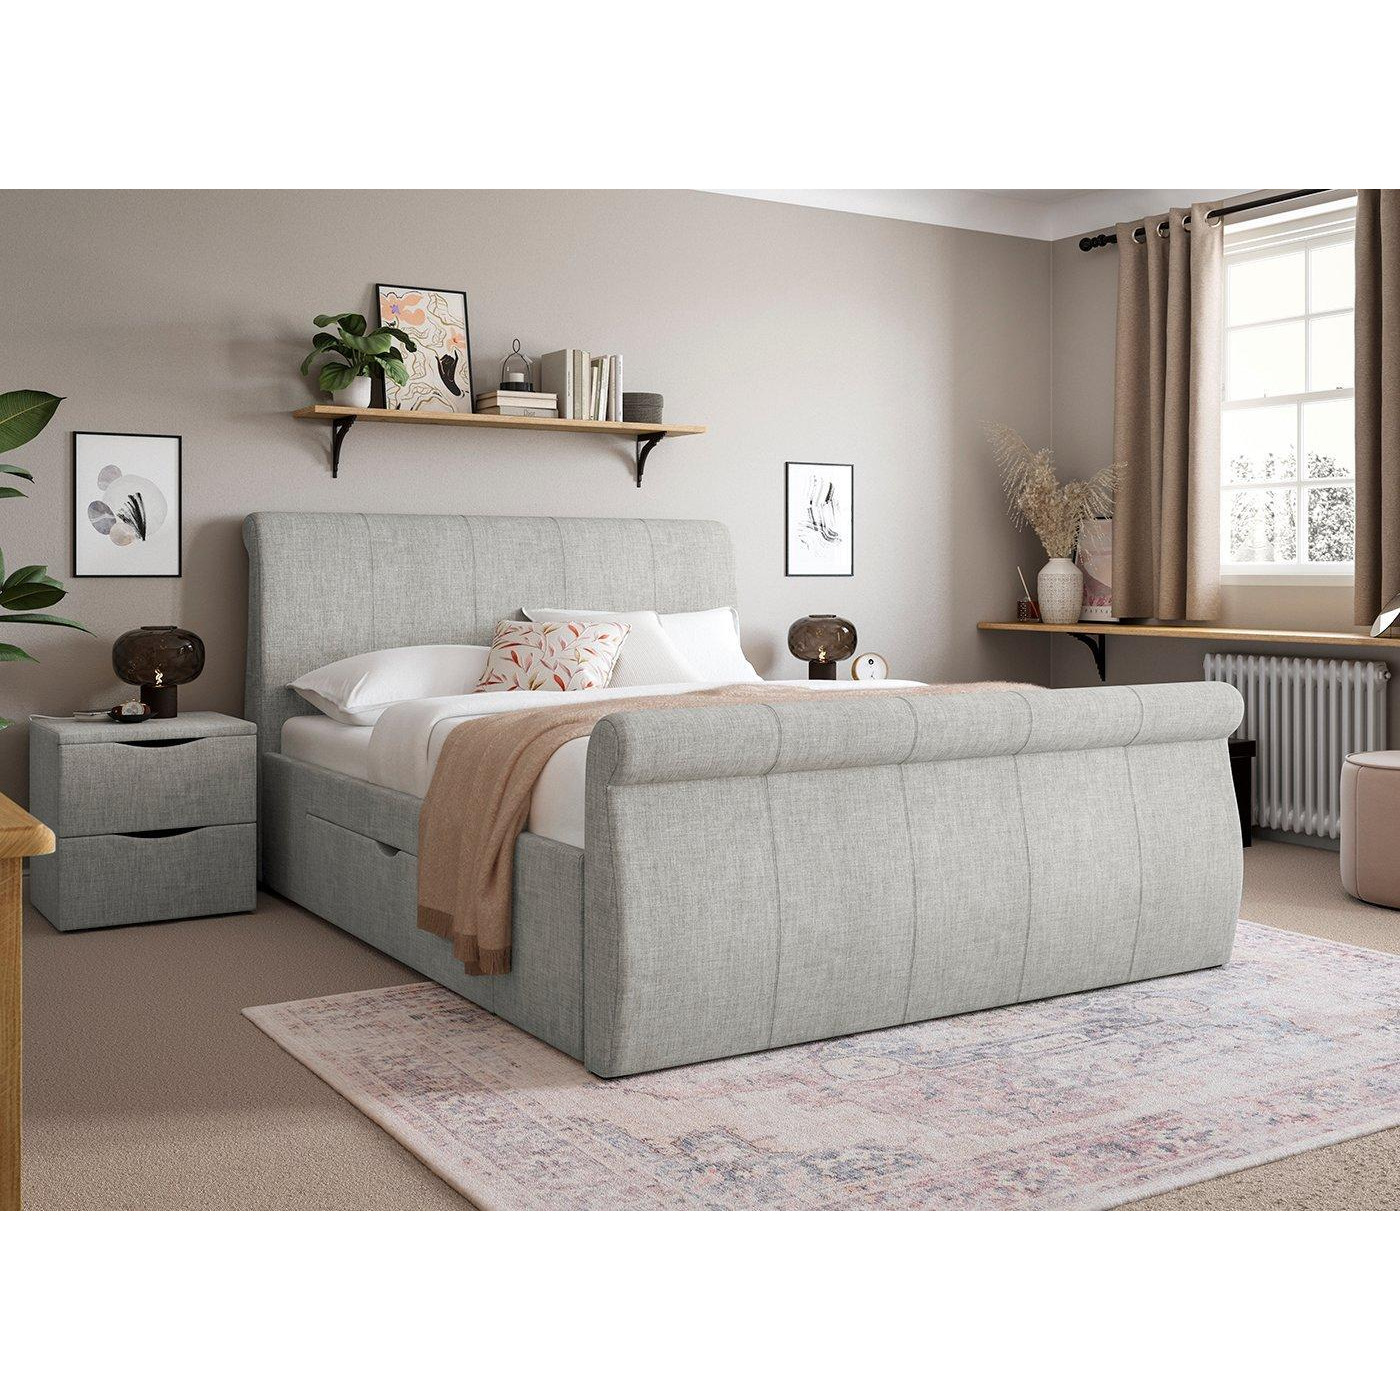 Lucia Upholstered Bed Frame - 5'0 King - Silver